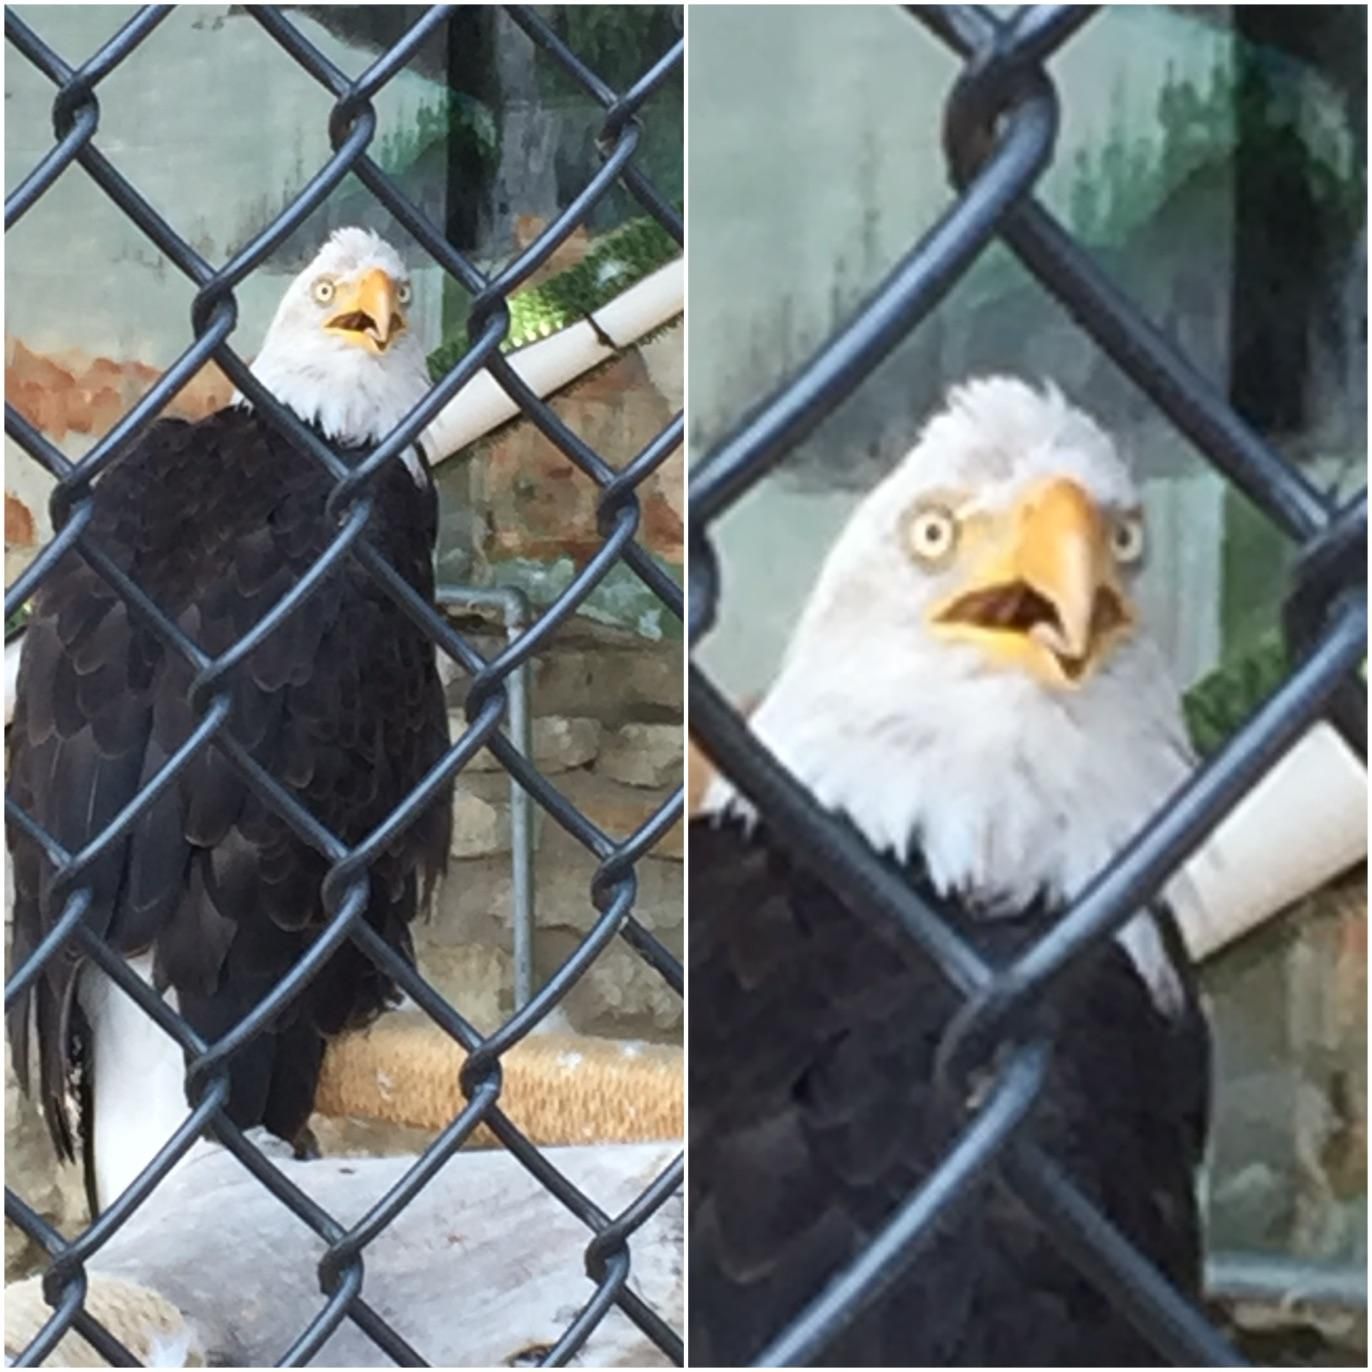 I think I captured this bald eagle during an existential life crisis